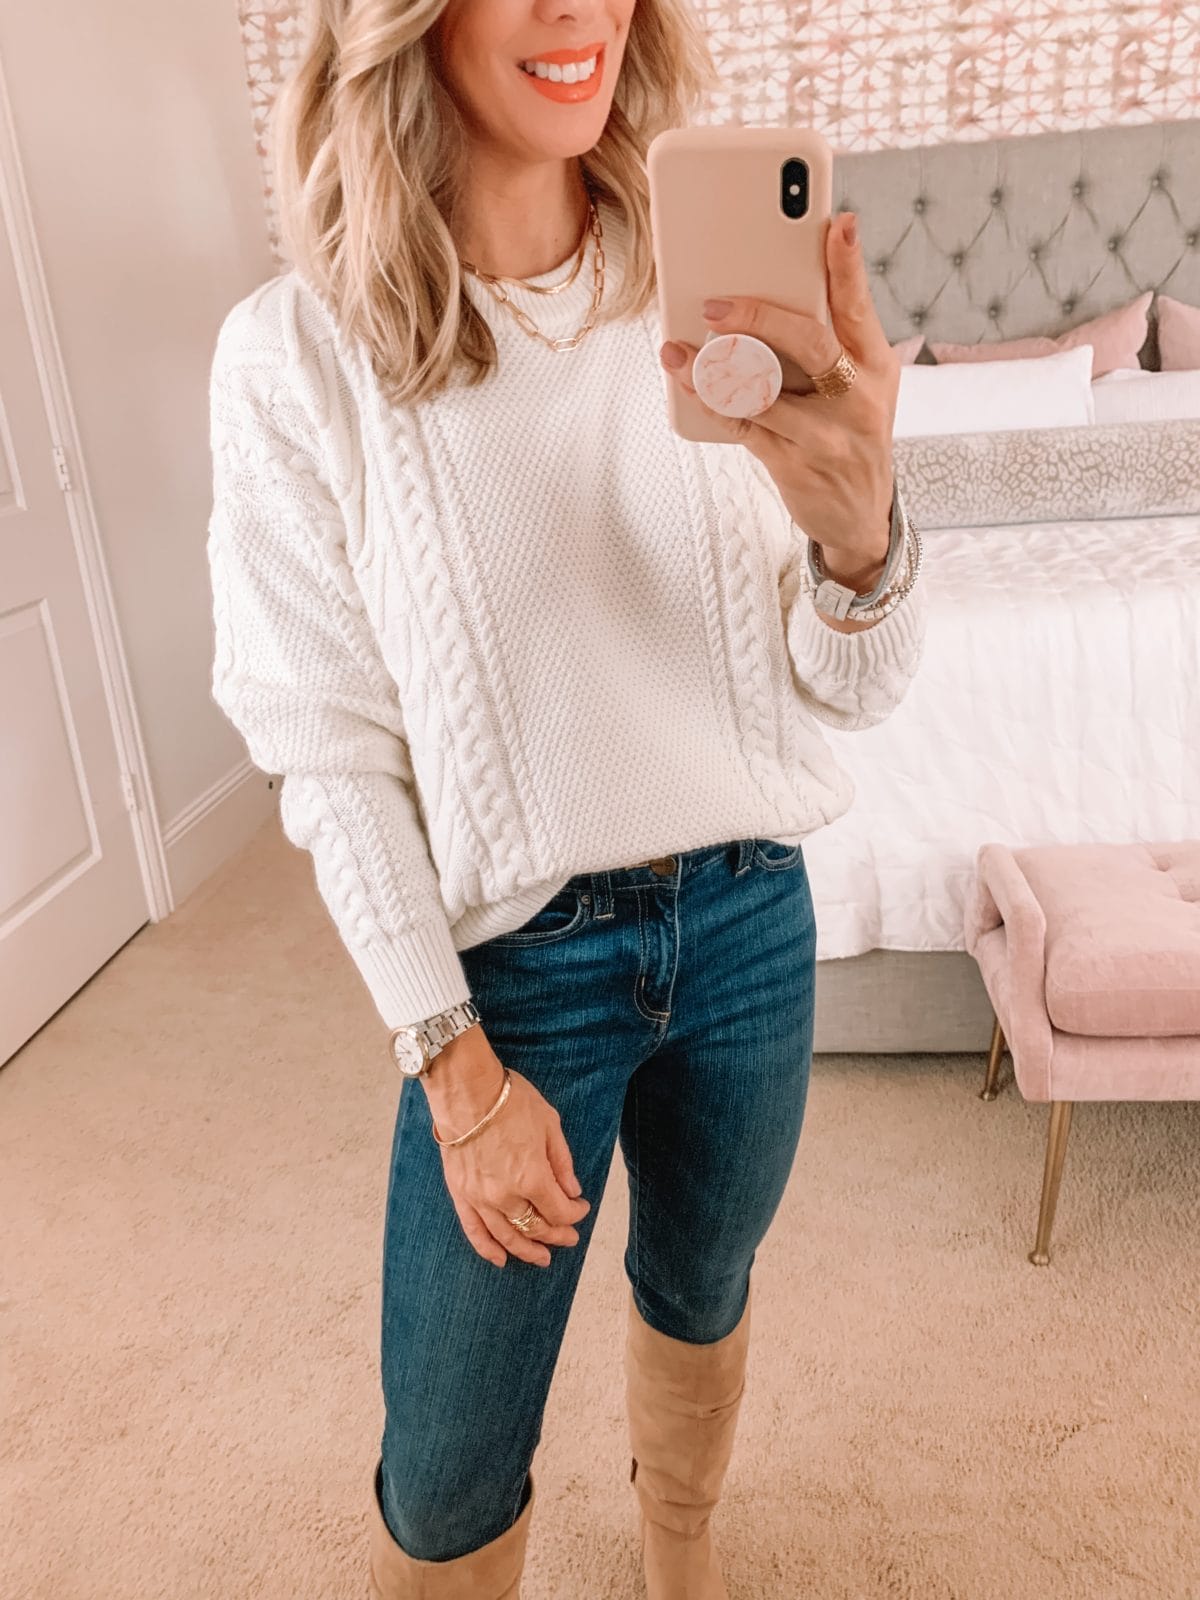 Amazon Fashion Faves, Cable knit Sweater, Jeans, Boots